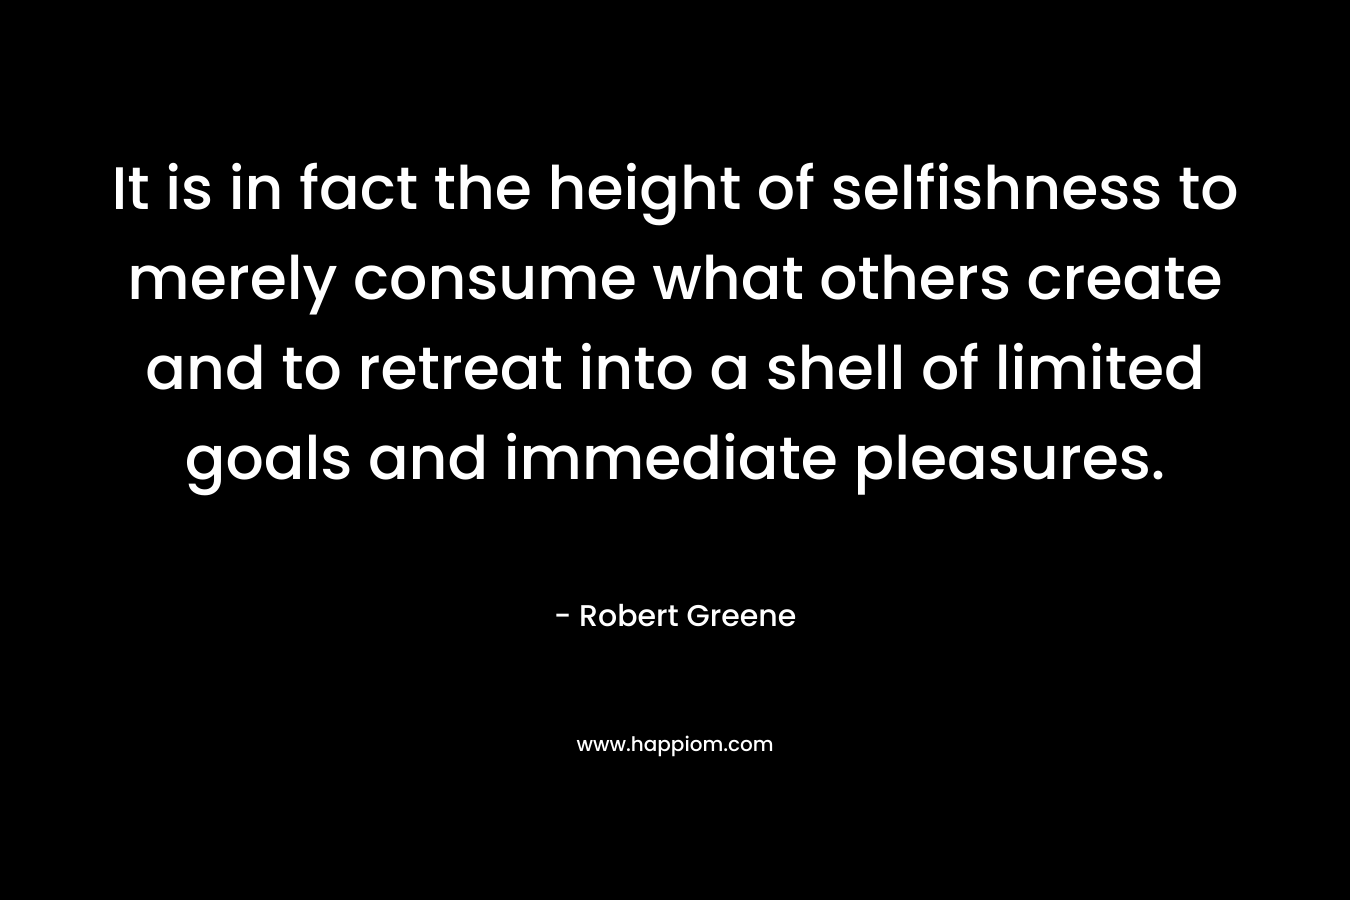 It is in fact the height of selfishness to merely consume what others create and to retreat into a shell of limited goals and immediate pleasures. – Robert Greene